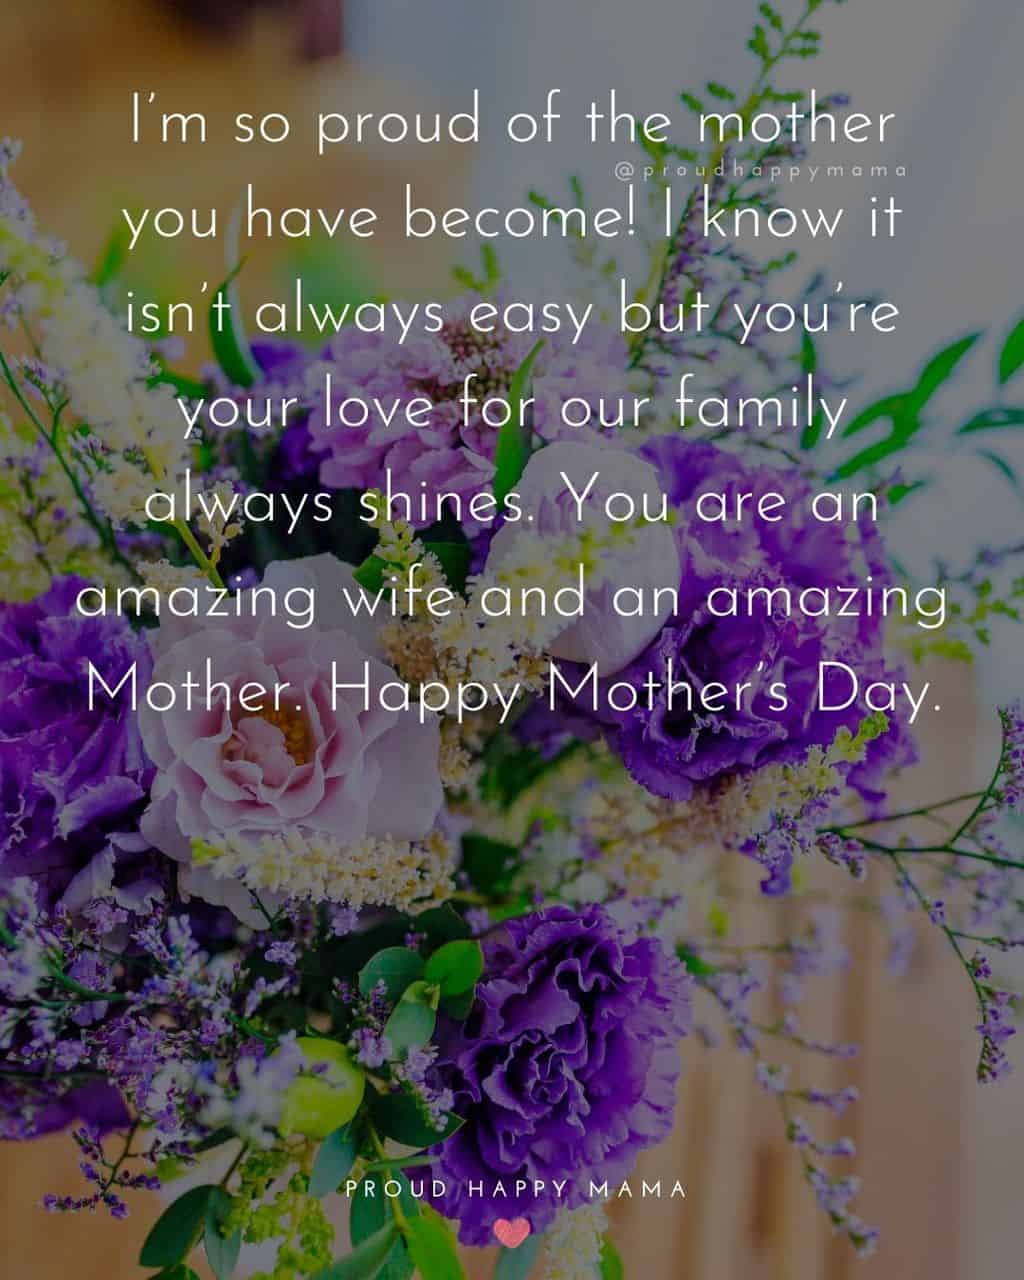 Happy Mothers Day Quotes For Wife - I’m so proud of the mother you have become! I know it isn’t always easy but you’re